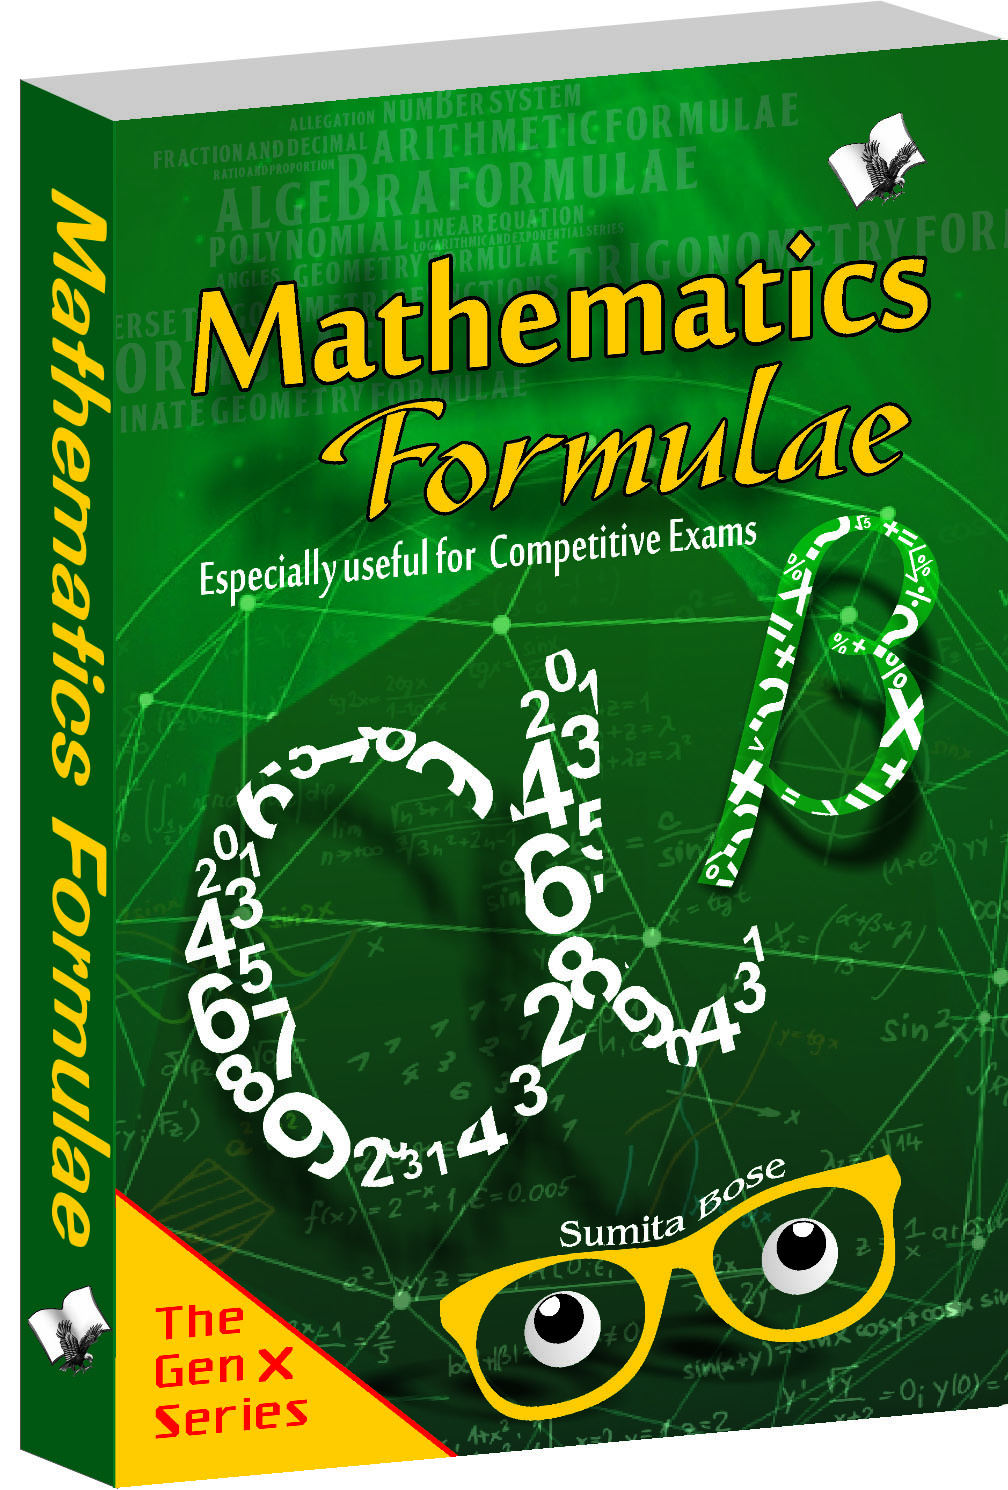 mathematics-formulae-for-competitive-examinations-formulae-that-solve-problems-in-a-jiffy